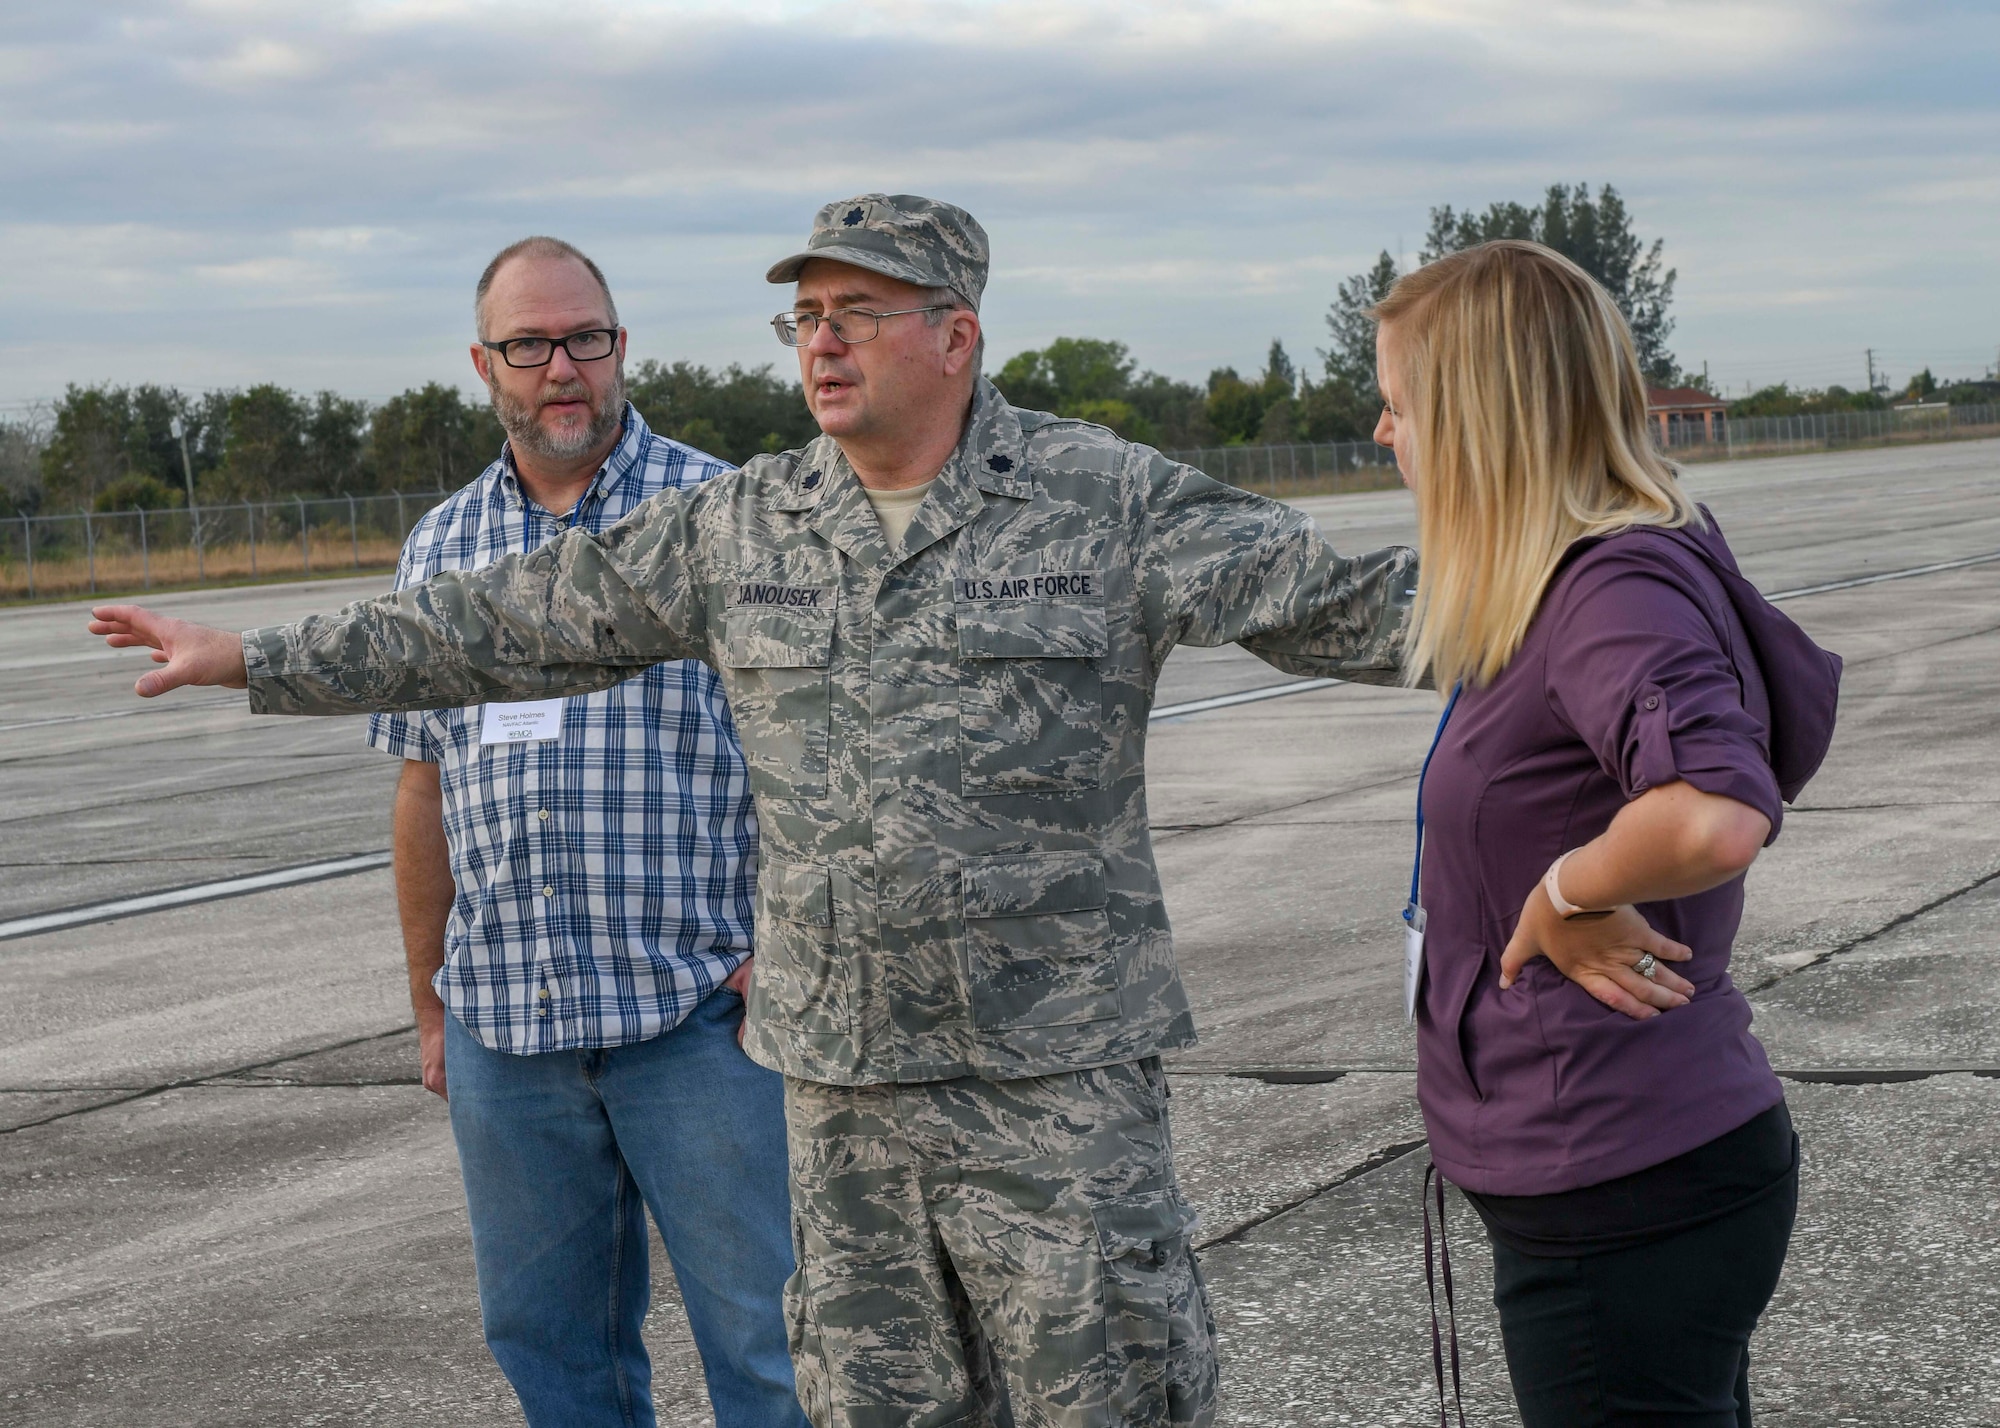 Lt. Col. Tom Janousek, an entomologist assigned to the 910th Airlift Wing's 757th Airlift Squadron, explains to attendees of a Department of Defense aerial spray course the techniques used during an aerial spray demonstration, Jan. 9, 2019 at the Buckingham Air Field at the Lee County Mosquito Control District facilities in Lehigh Acres, Florida.